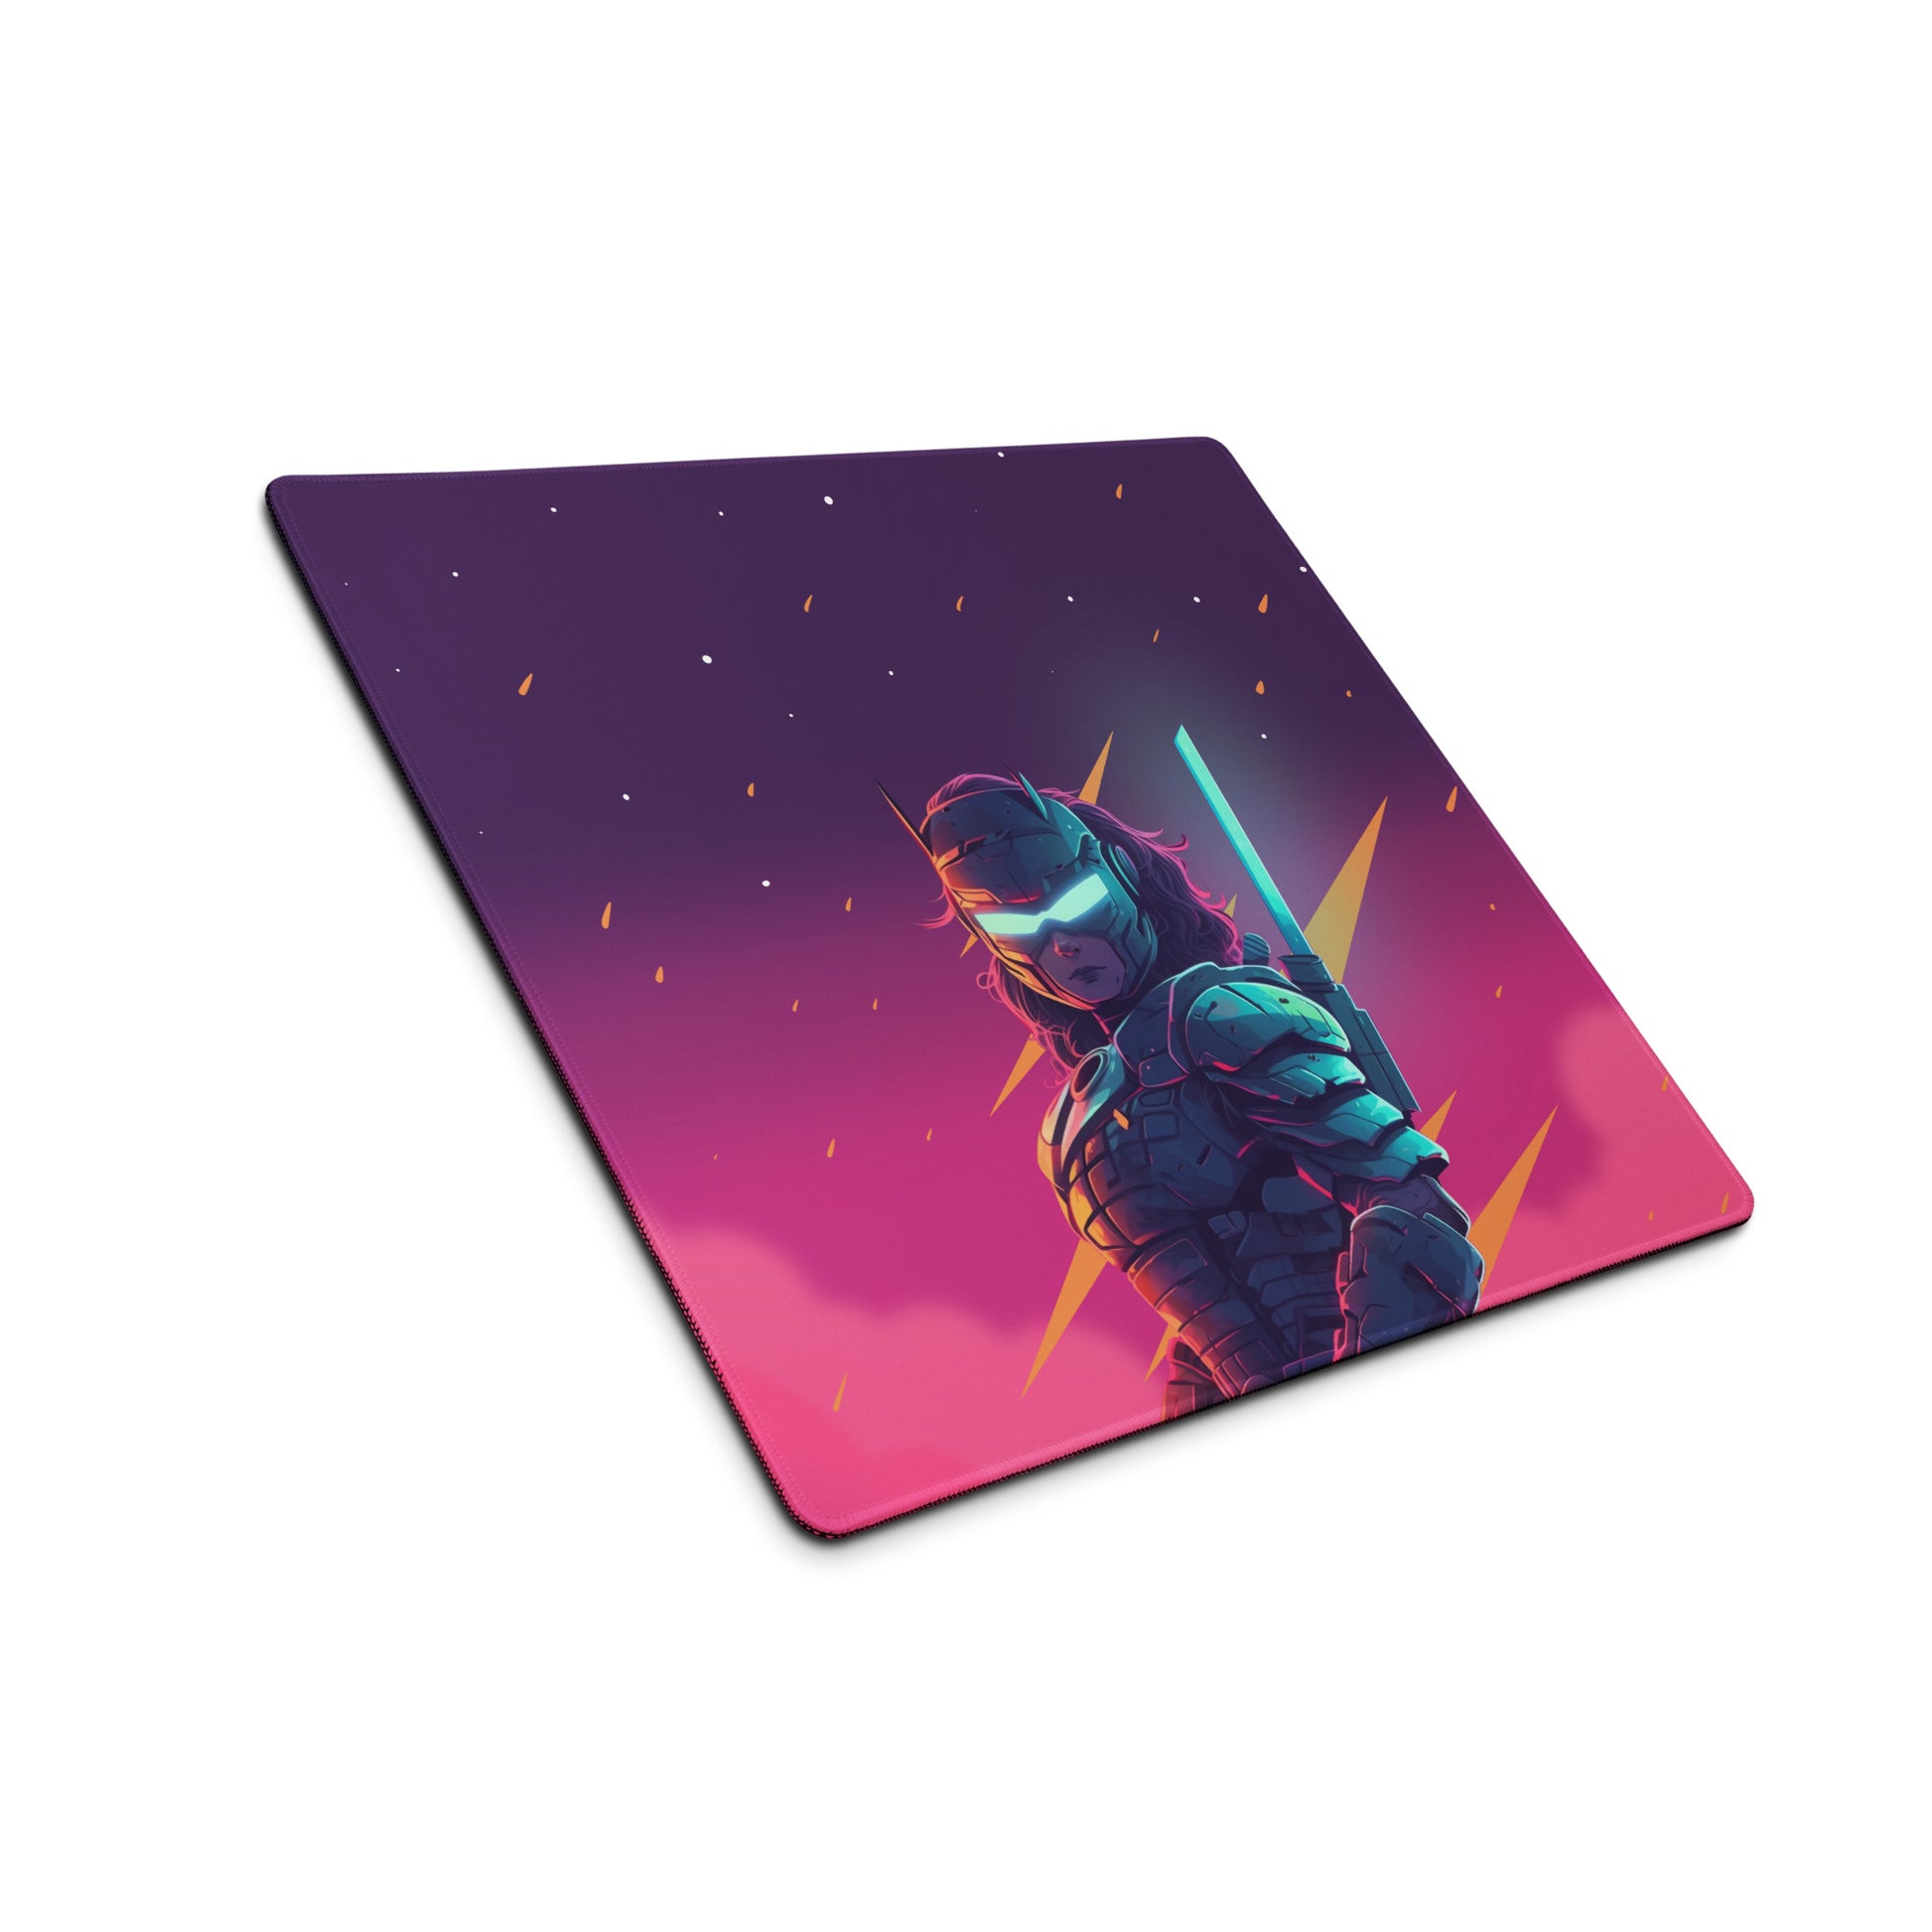 A 18" x 16" pink and purple desk pad with a futuristic samurai sitting at an angle.